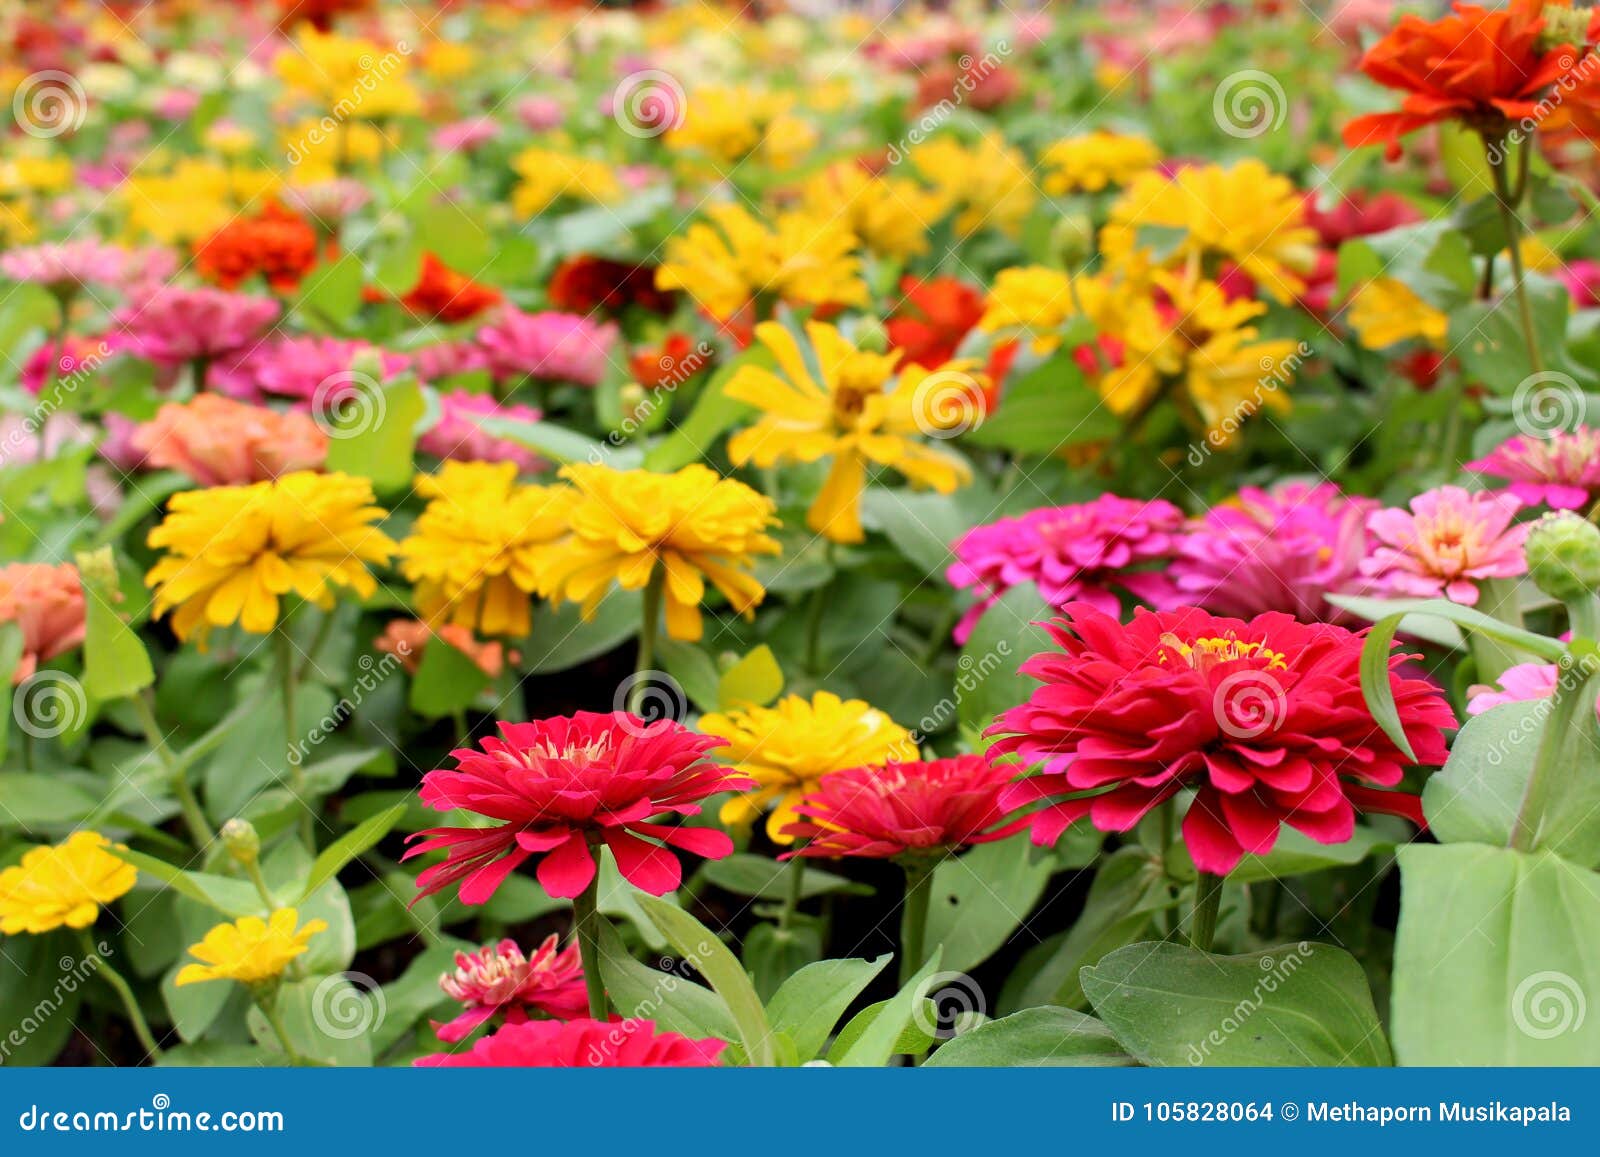 Beautiful Colorful Zinnia Elegans Flowers On Wonderful Flowers Background In The Garden For Background Stock Photo Image Of Background Close 105828064